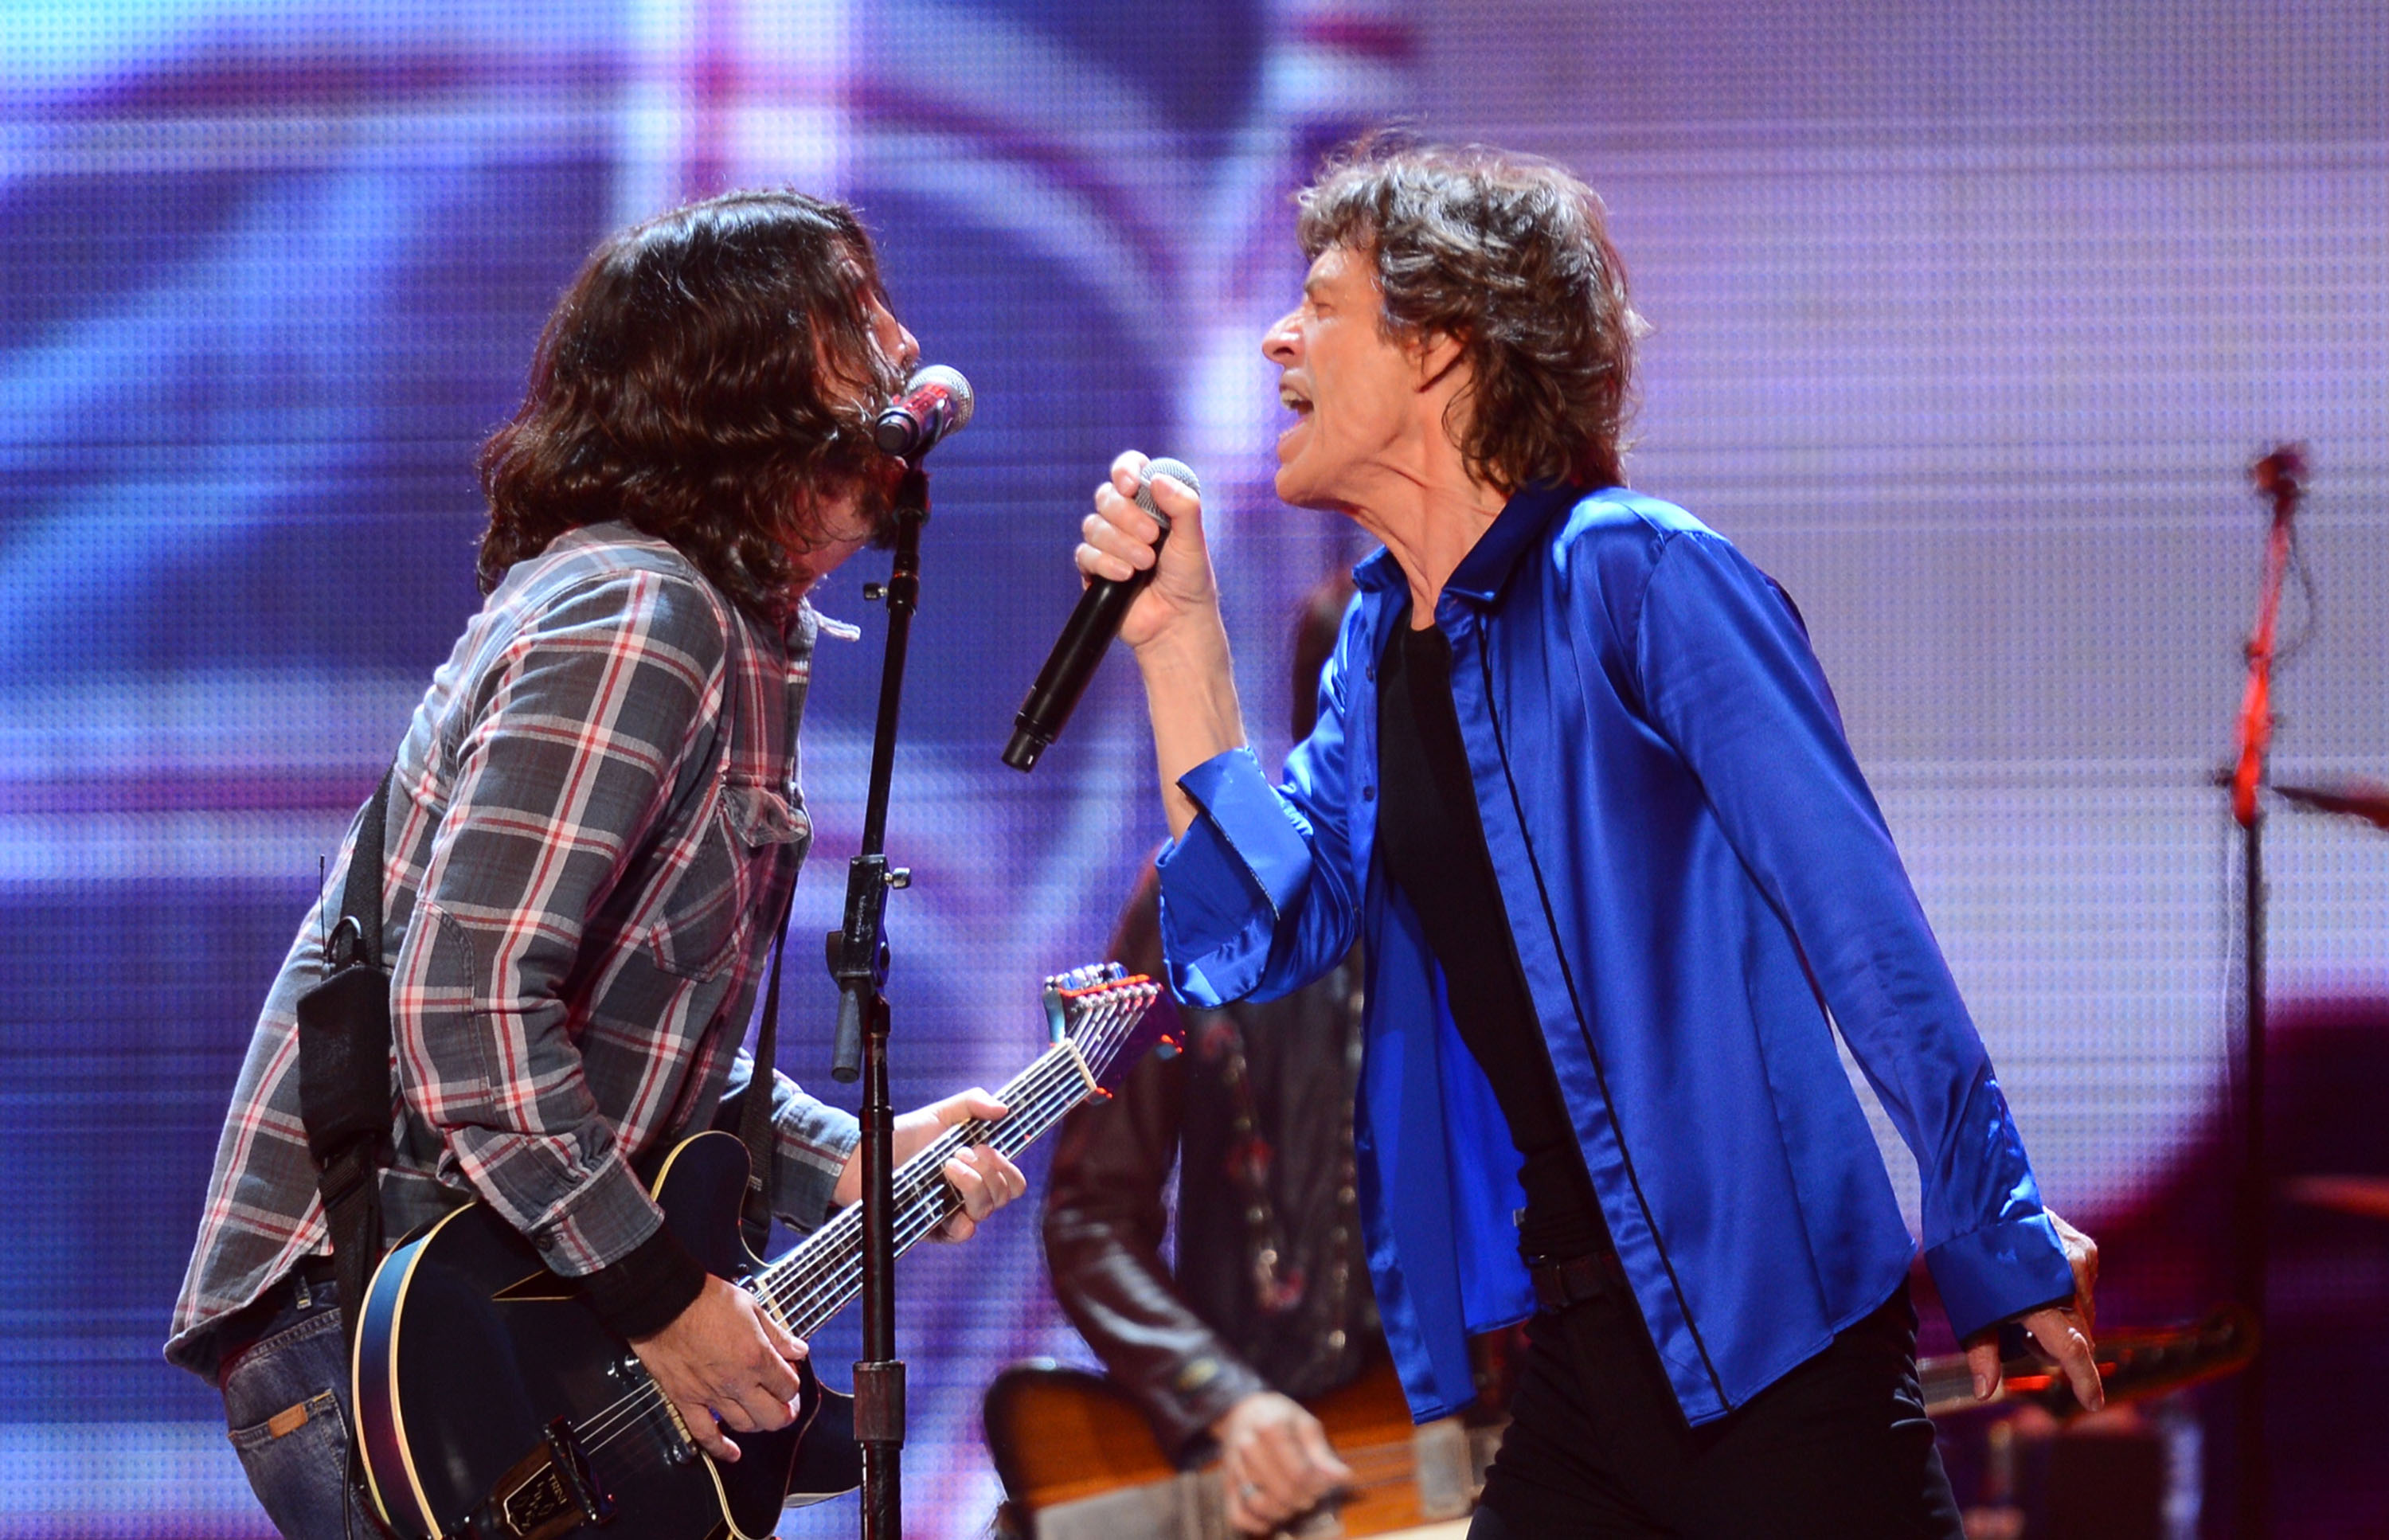 Dave Grohl and Mick Jagger.